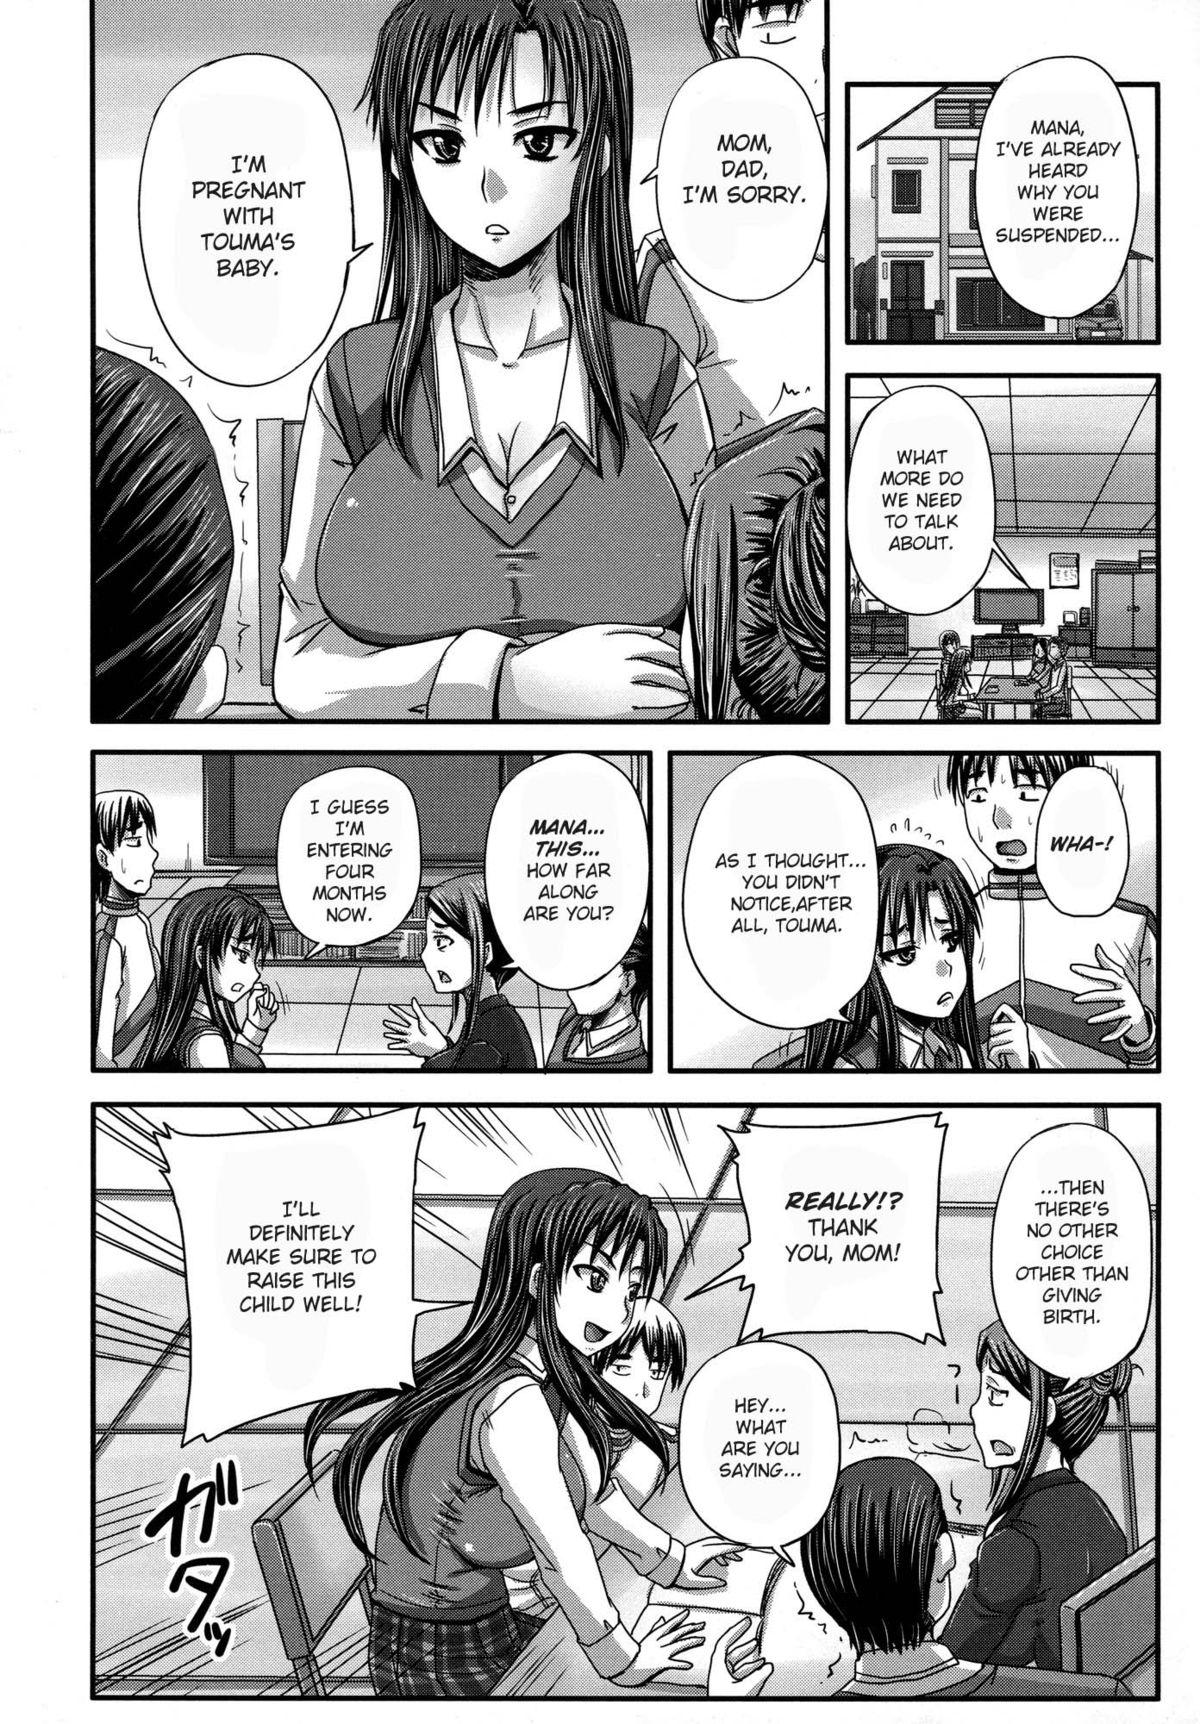 [Akigami Satoru] Tsukurou! Onaho Ane - Let's made a Sex Sleeve from Sister Ch. 1-2 [English] [snowshoes] 61